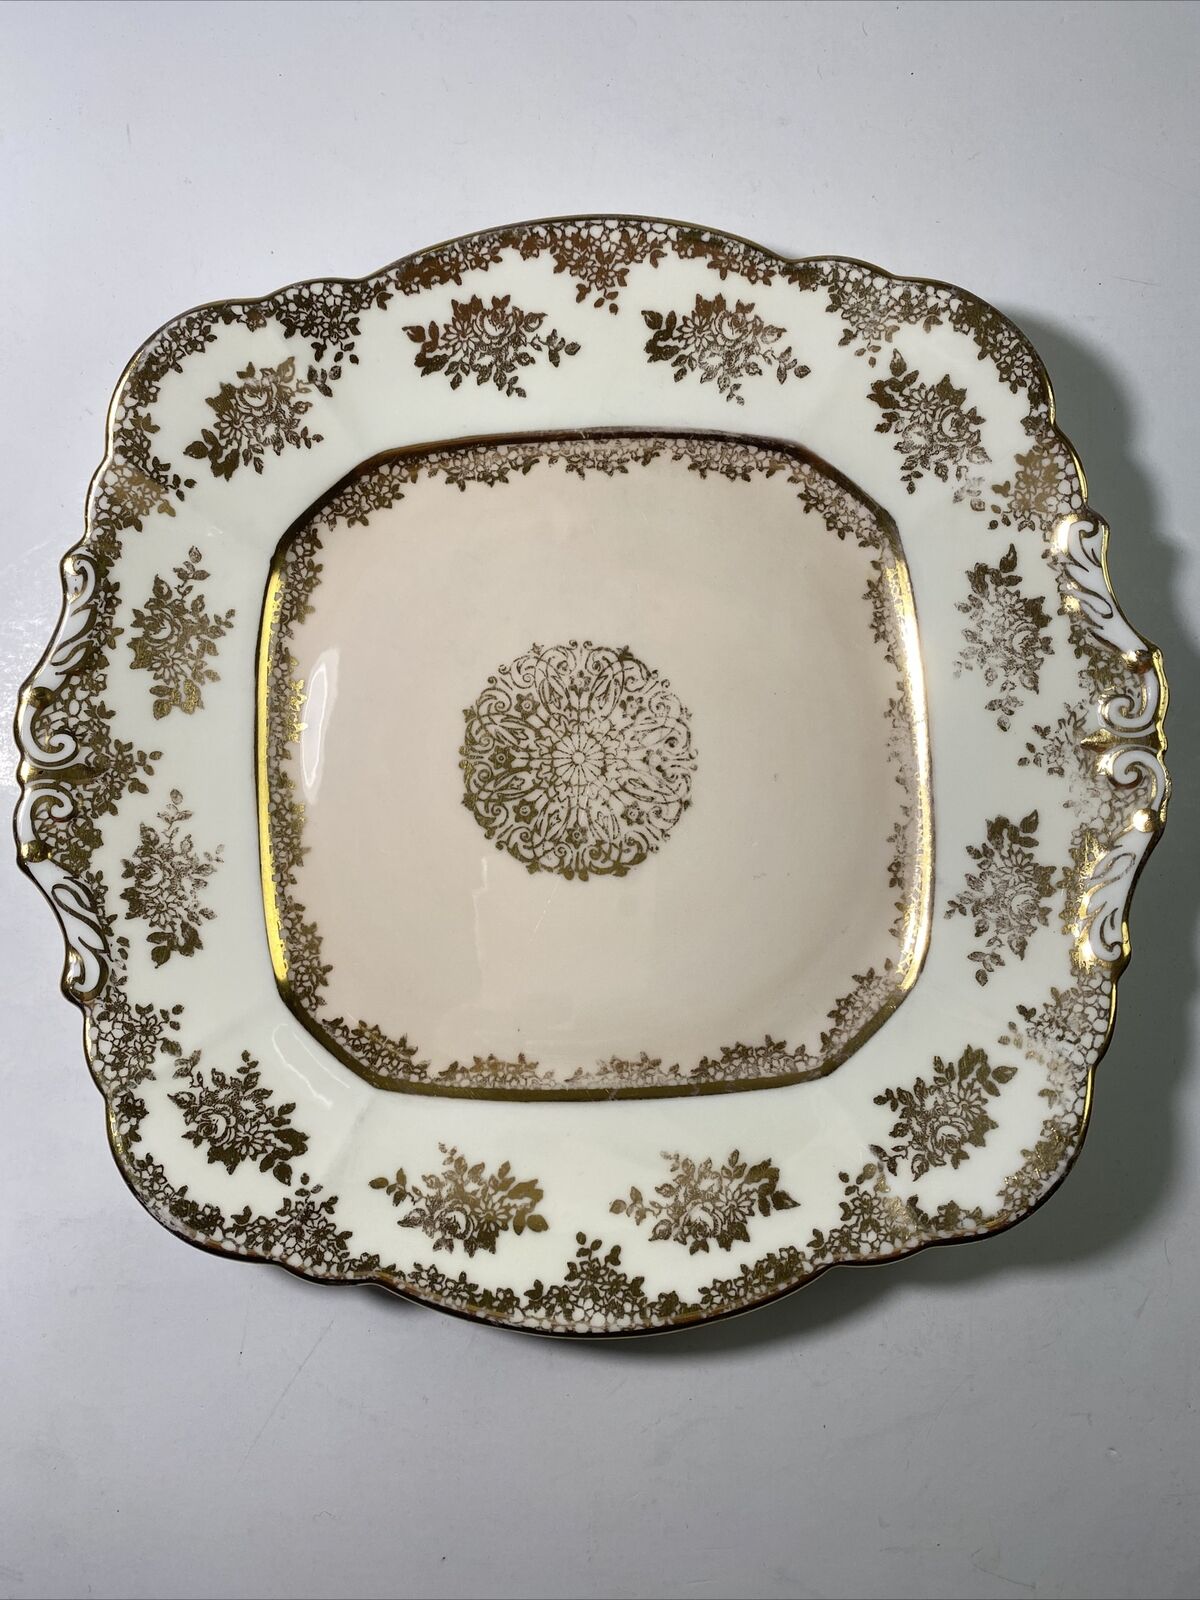 Antique  Paragon Porcelain Plate By Appointment To   H M Queen Mary